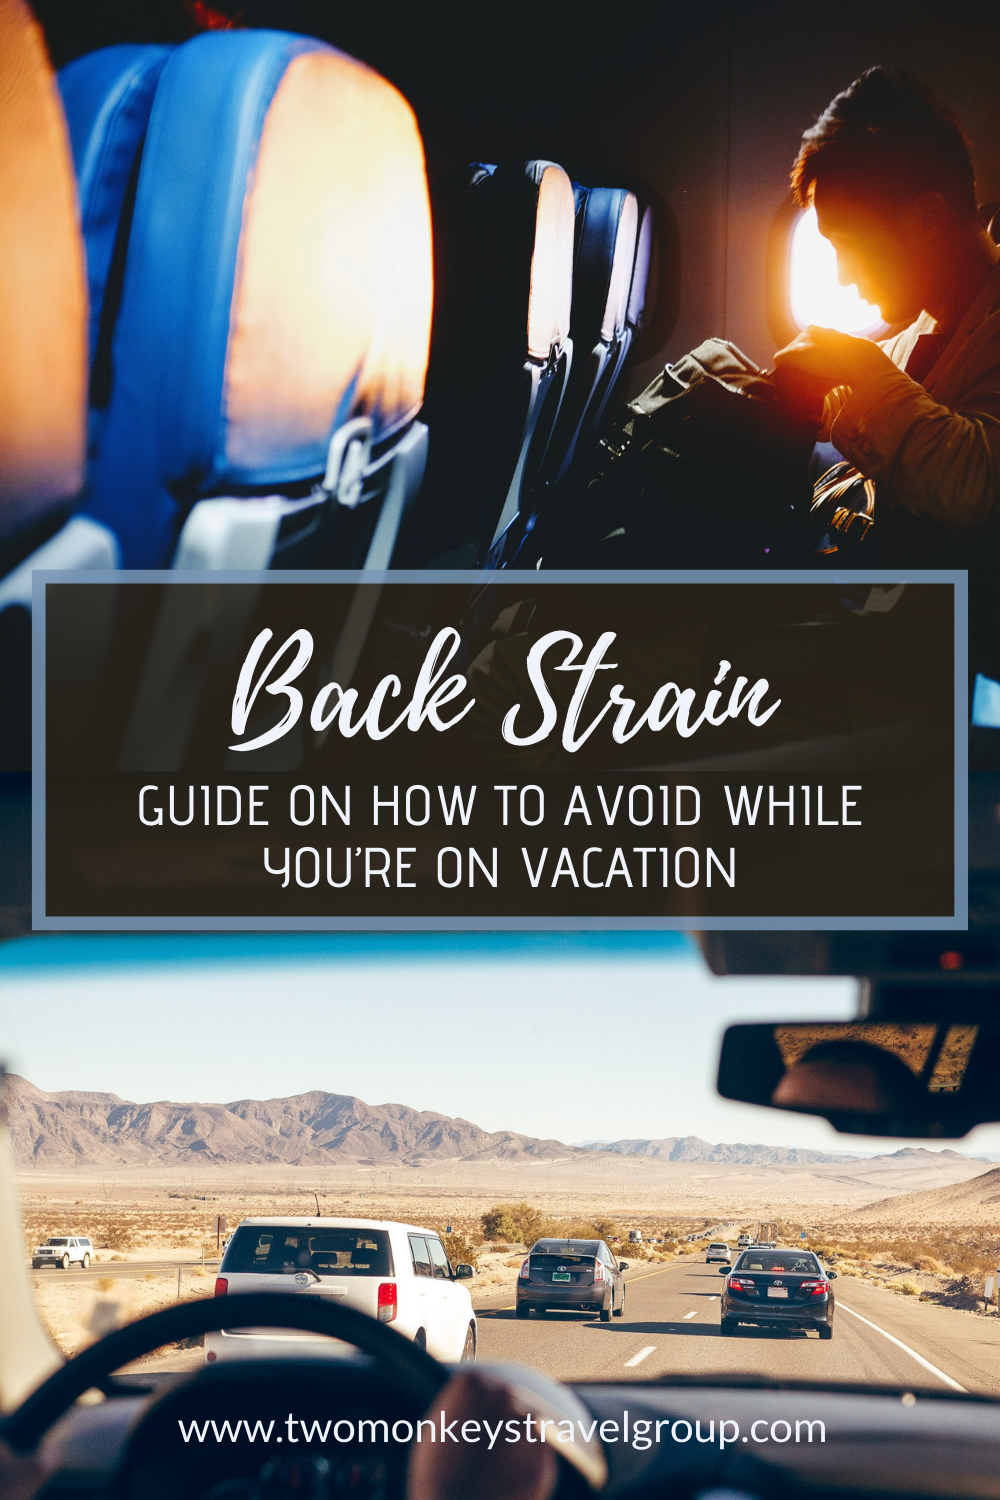 How To Avoid Back Strain While You’re On Vacation